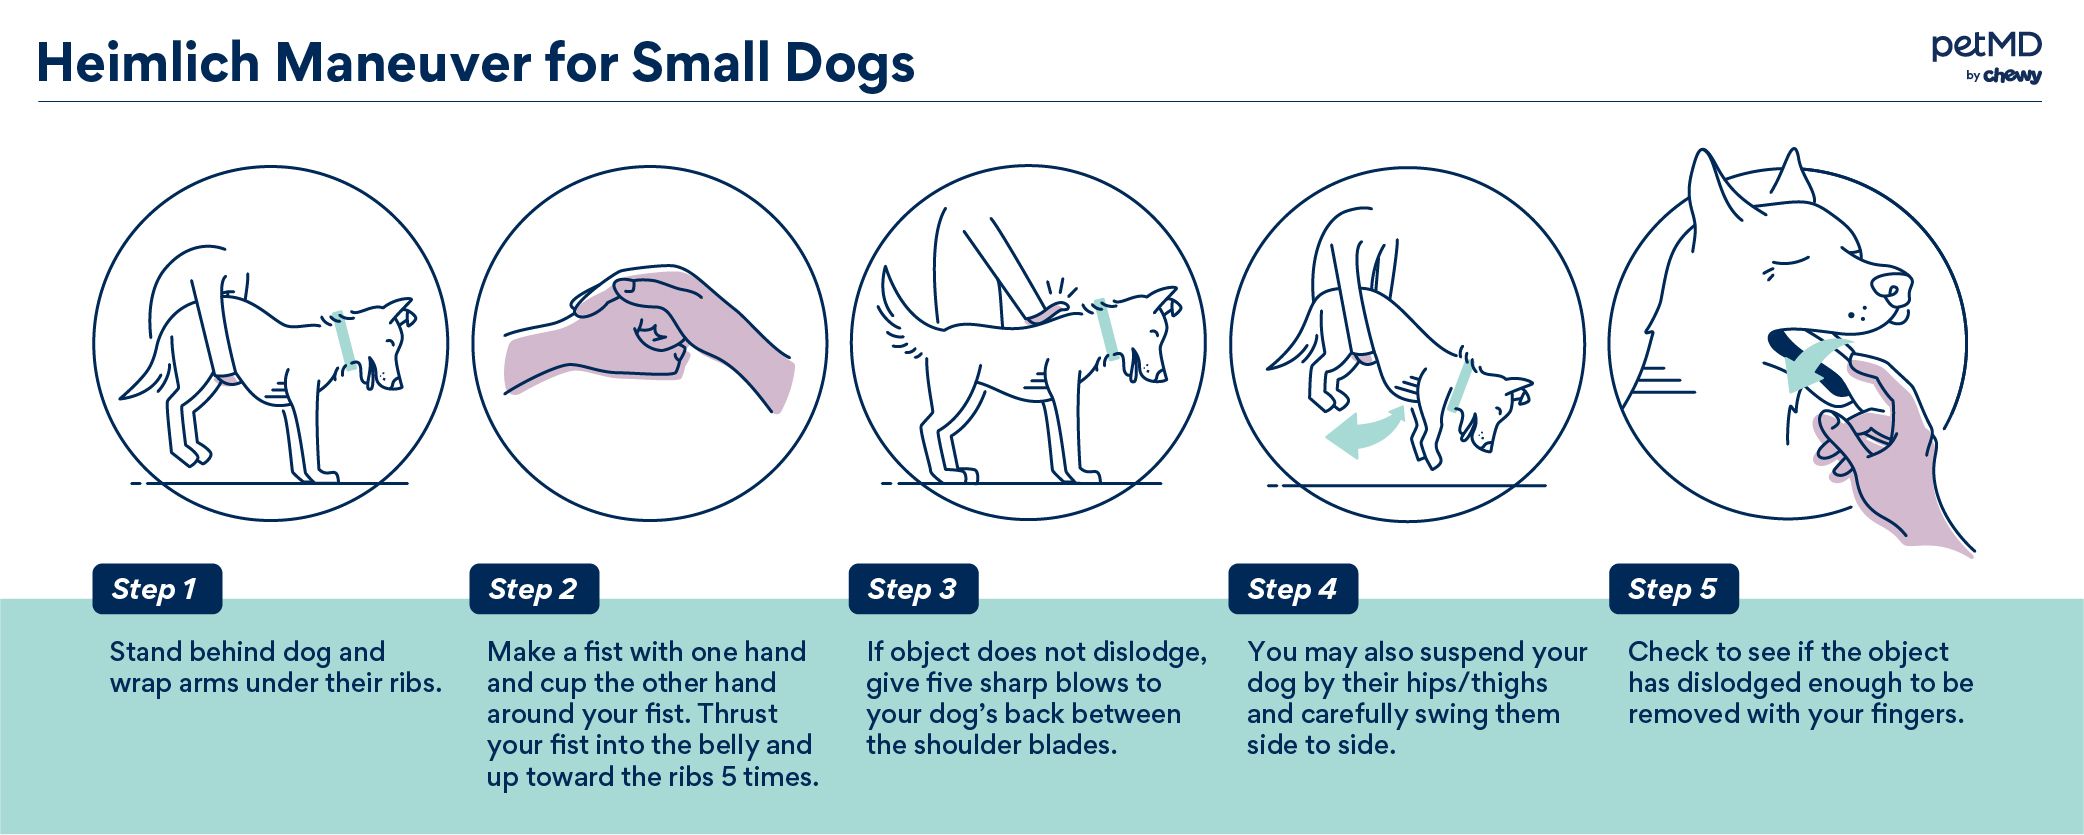 how to perform the heimlich maneuver for small dogs